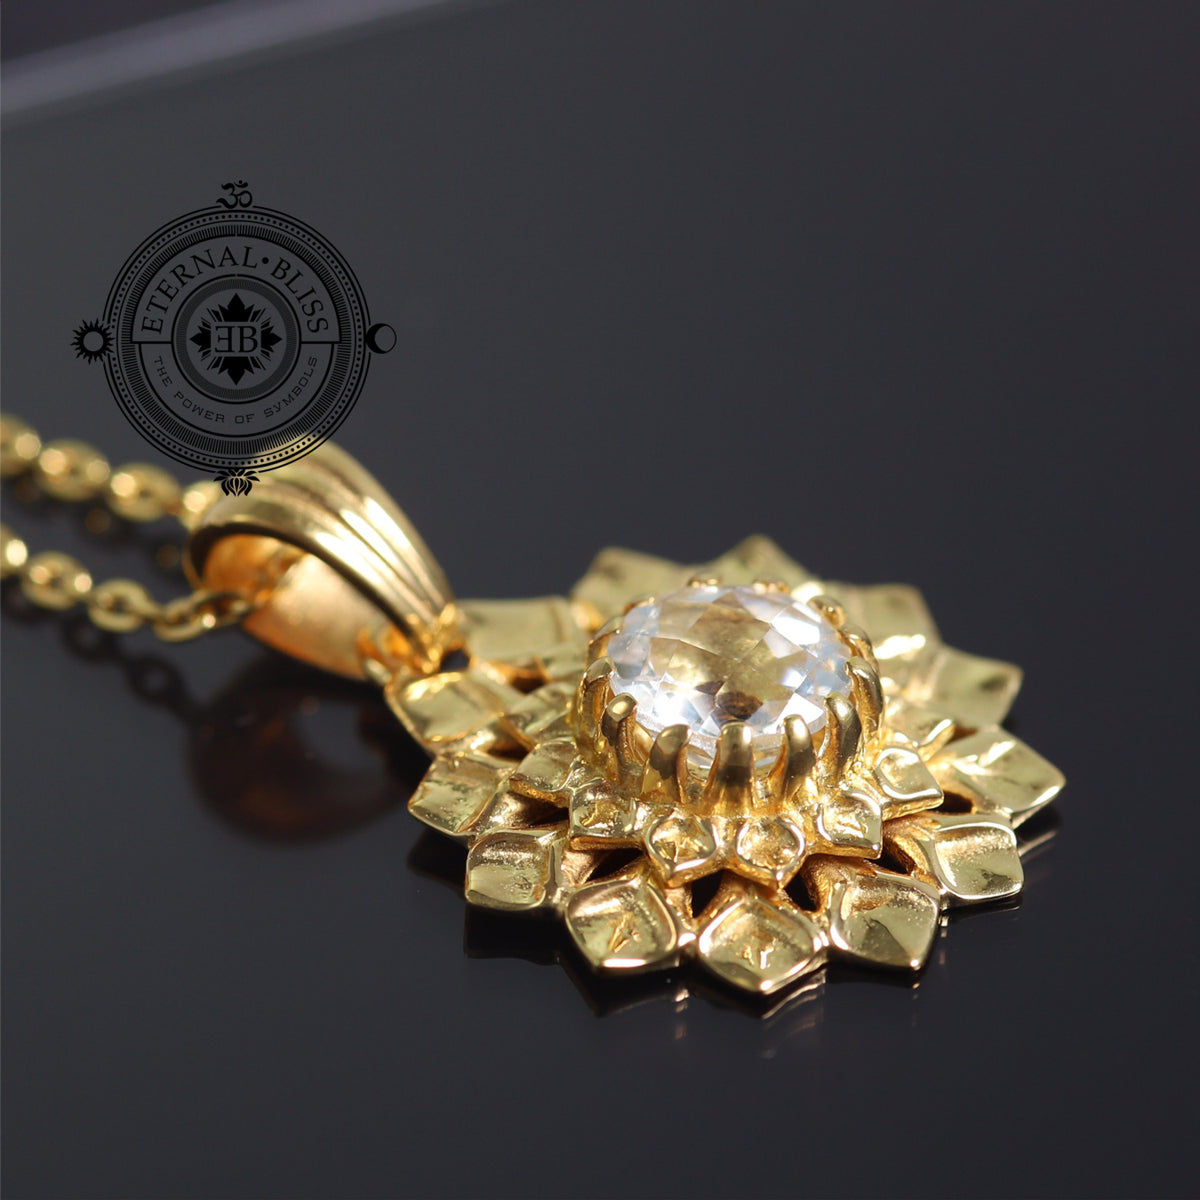 Spiritual jewelry: High-quality gold-plated crown chakra pendant with topaz gemstone | Enlightenment theme